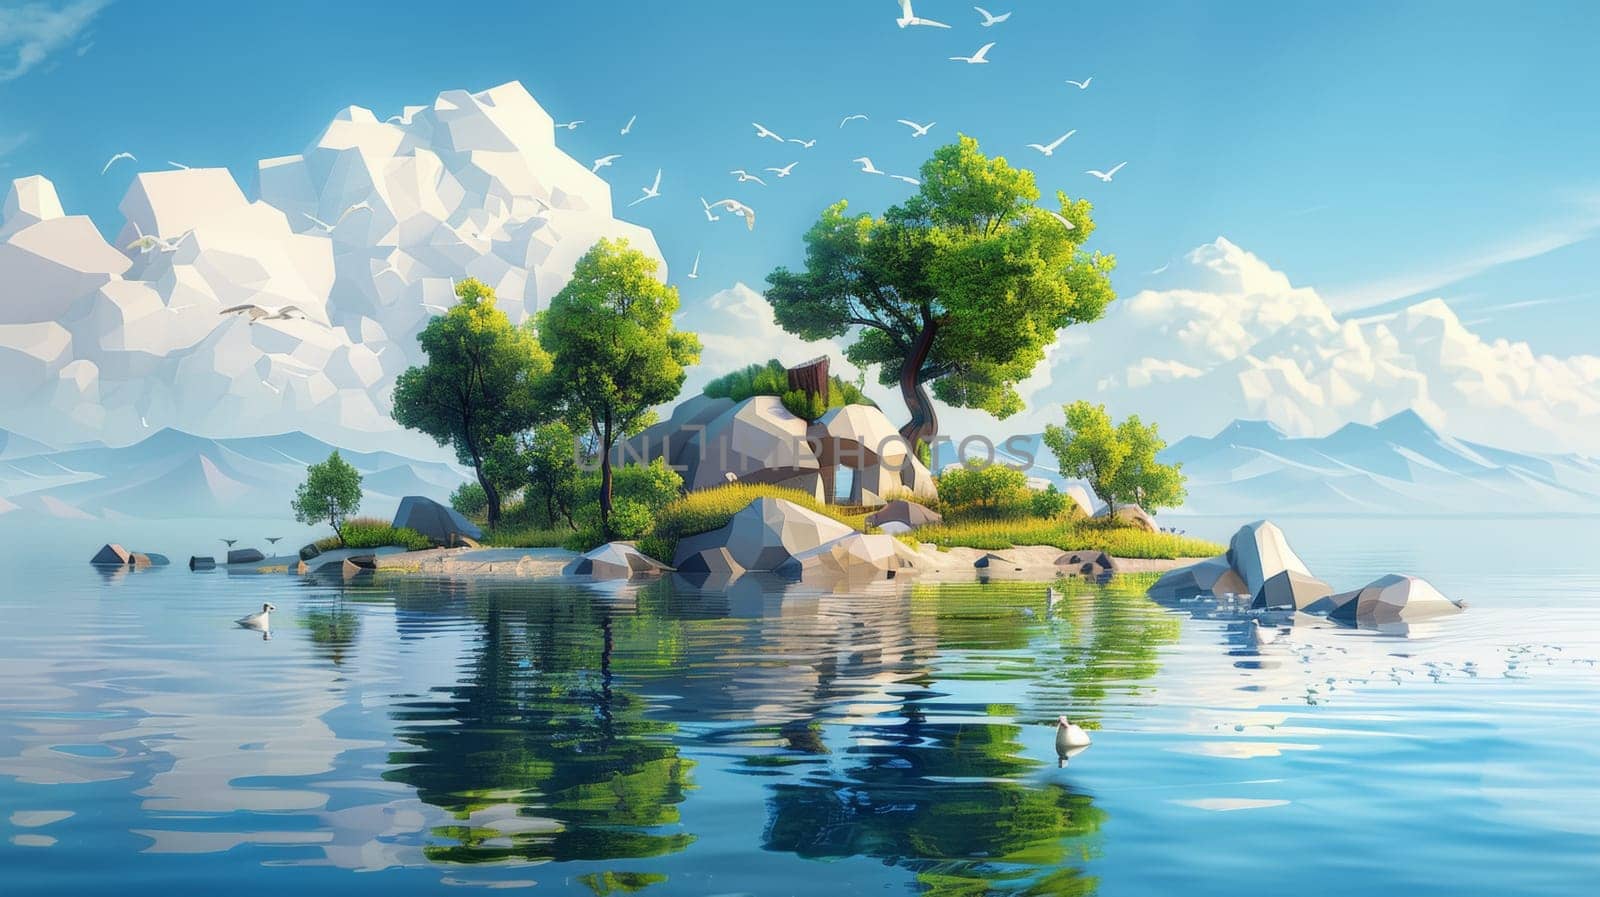 A small island with trees and birds floating in the water, AI by starush